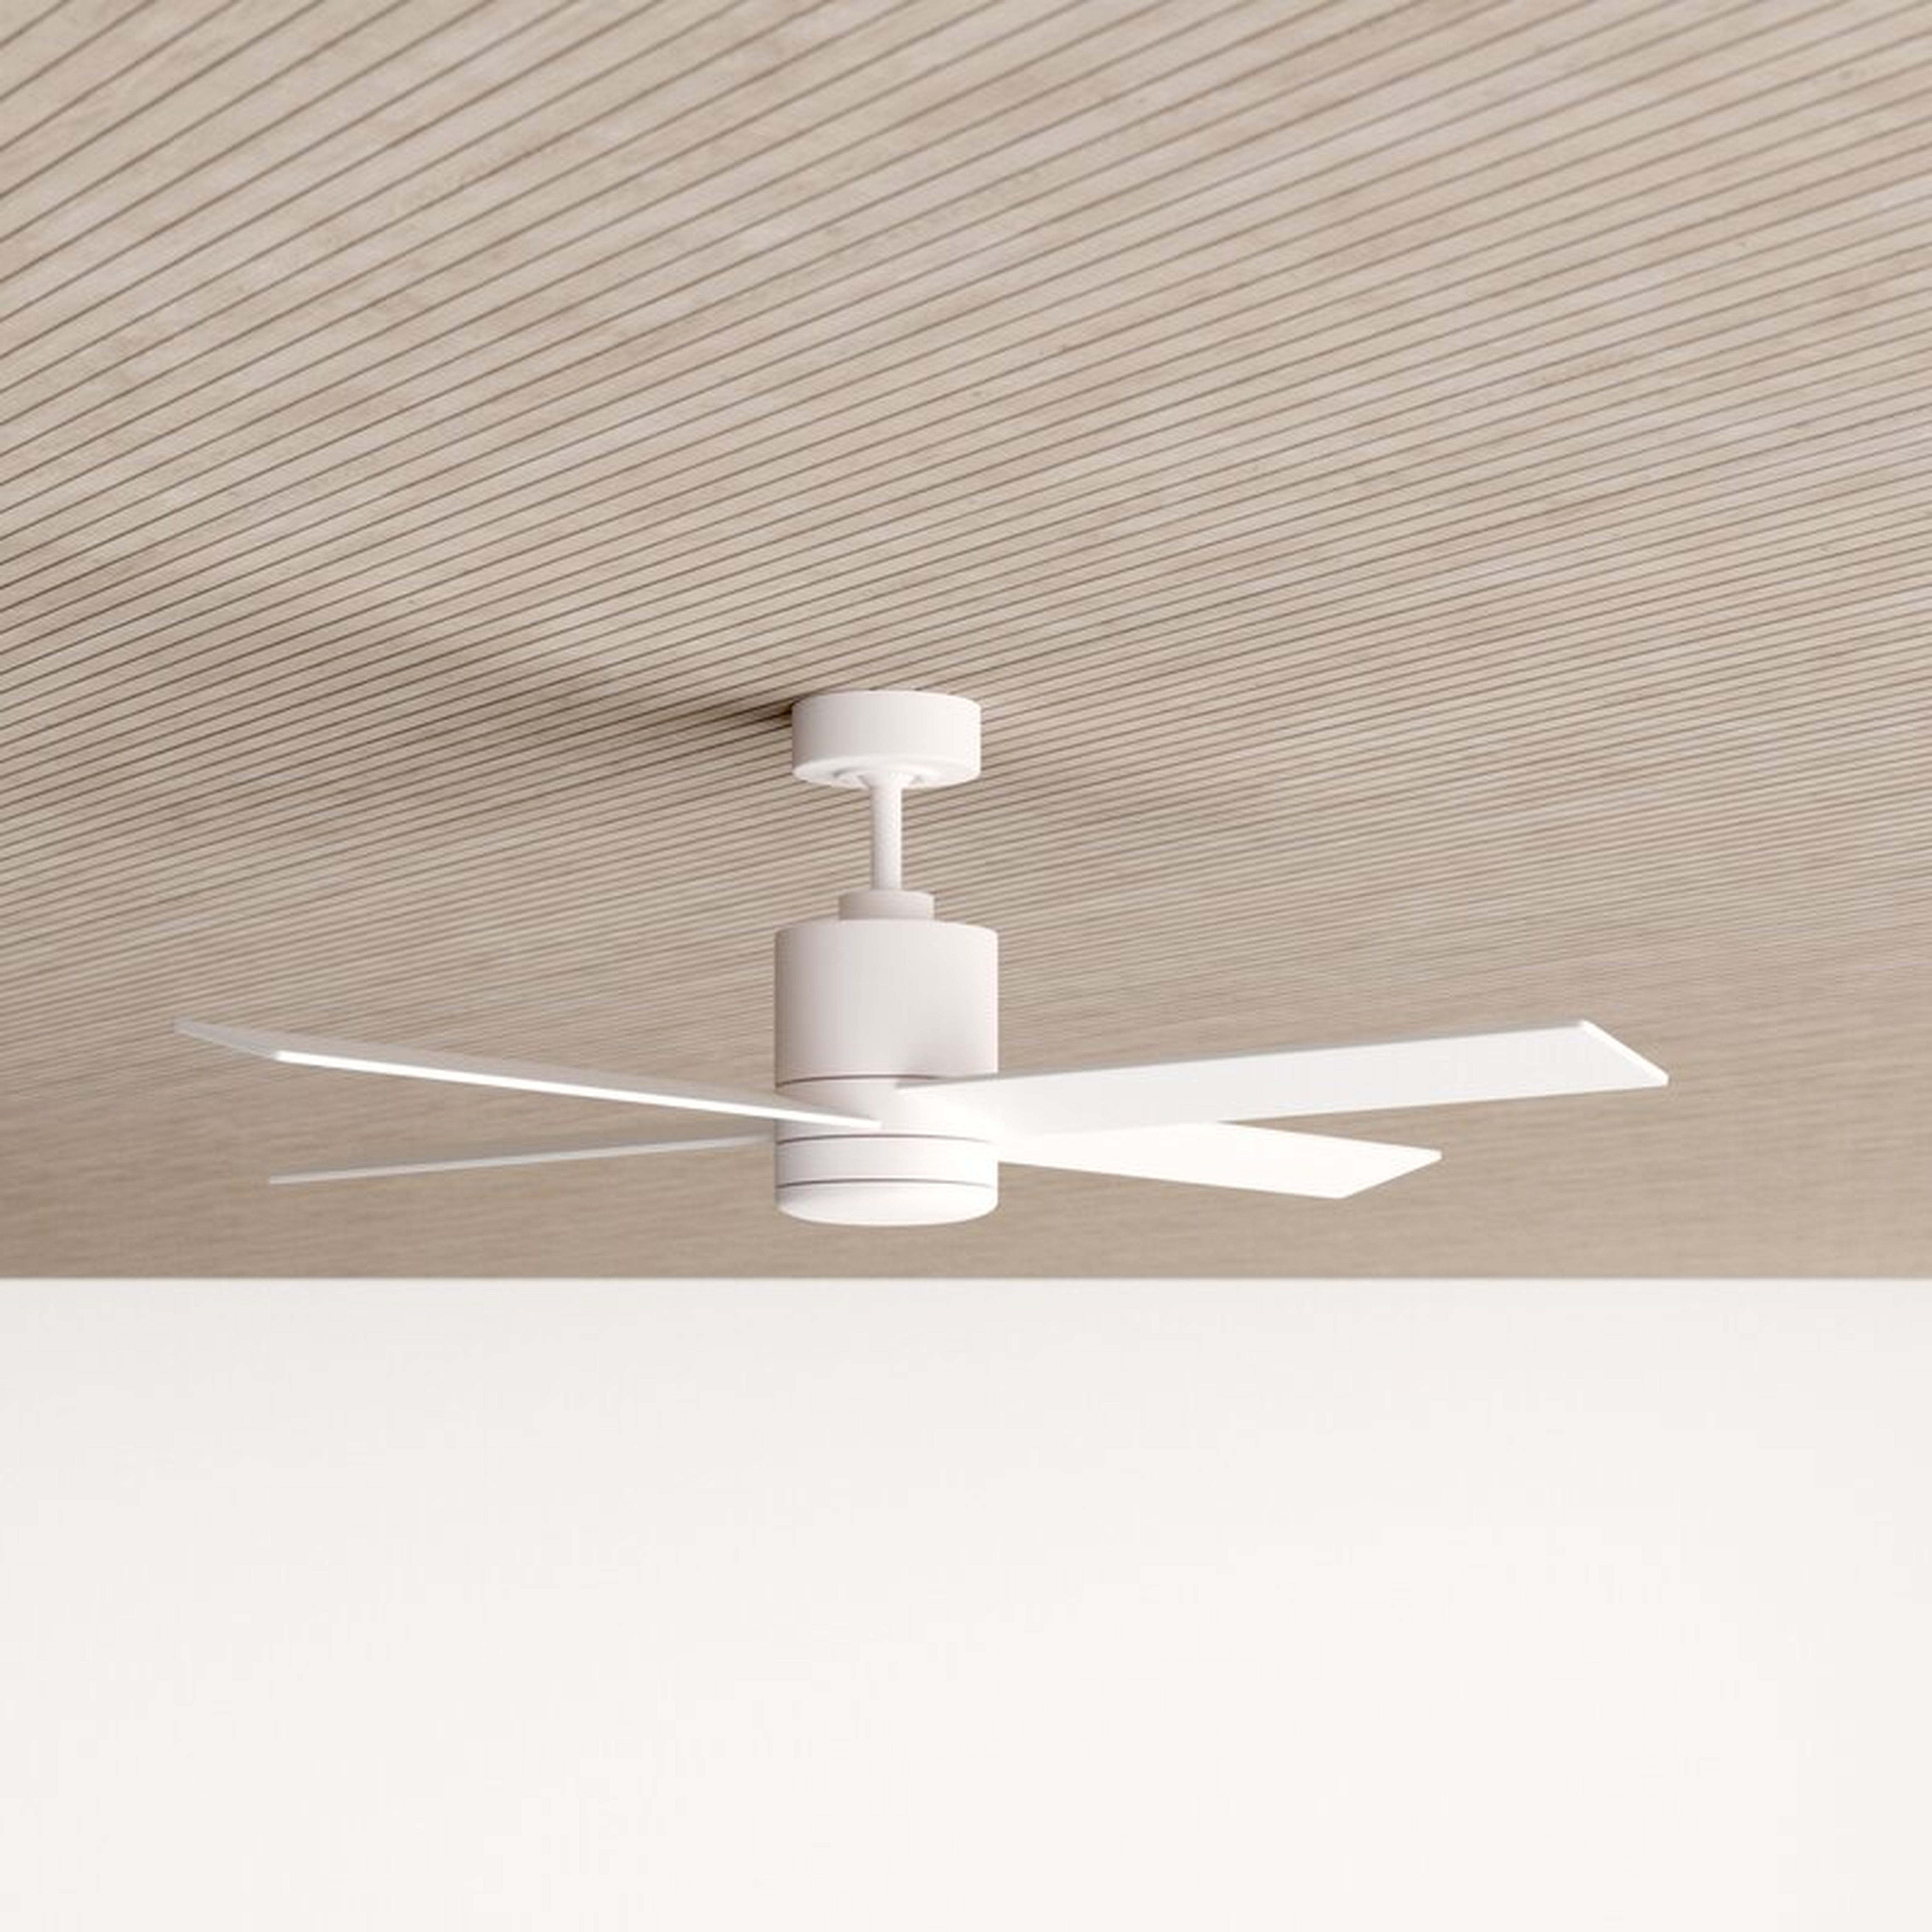 52" Malta 4 Blade Ceiling Fan with Remote, Light Kit Included - AllModern